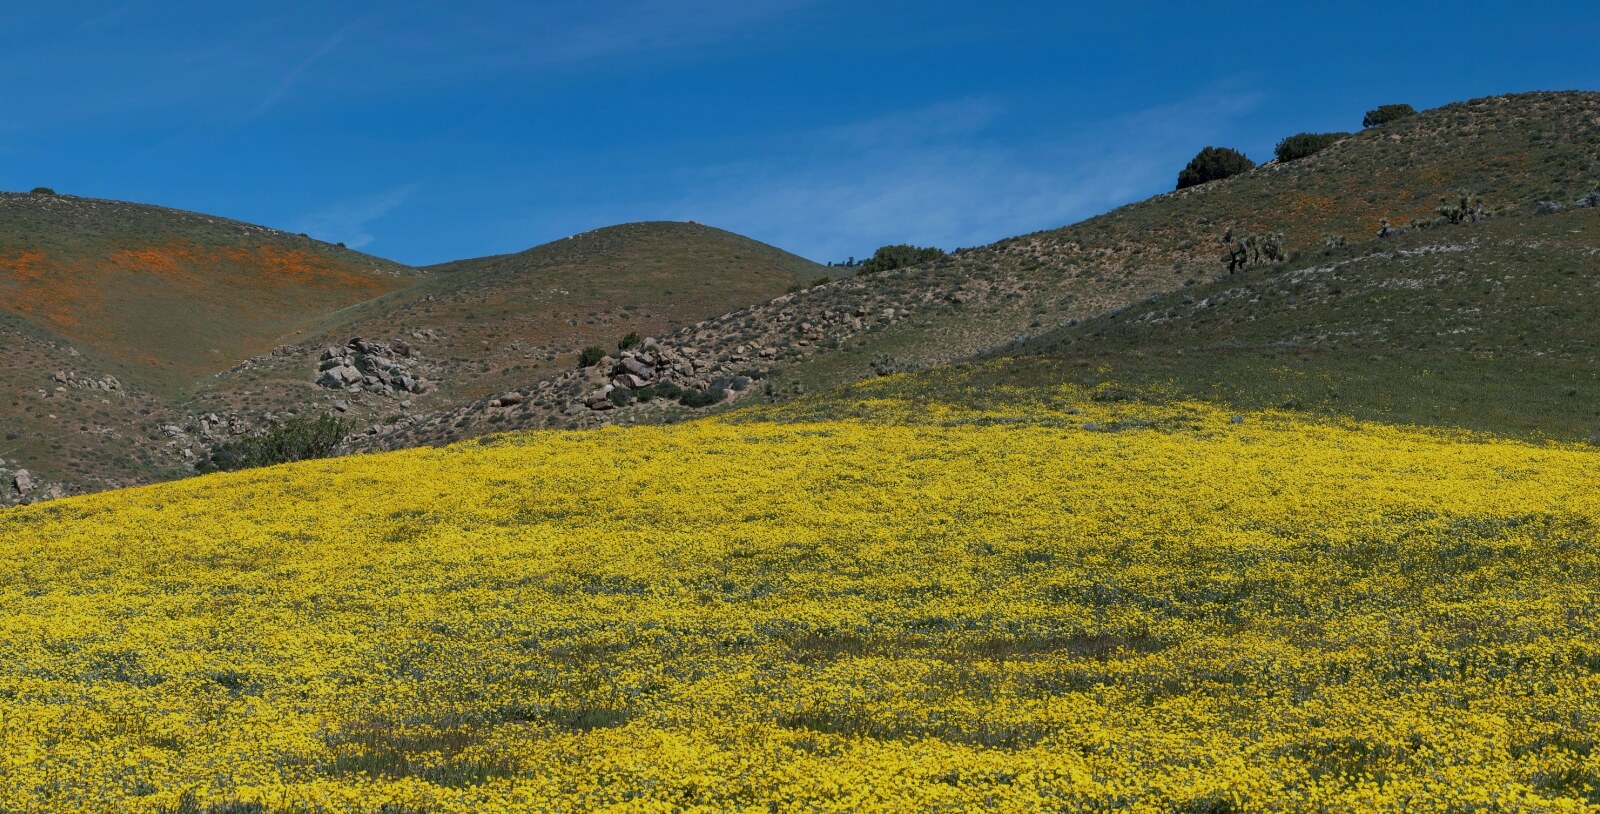 A vibrant yellow meadow meets rocky terrain in the natural landscape found in Tejon Ranch